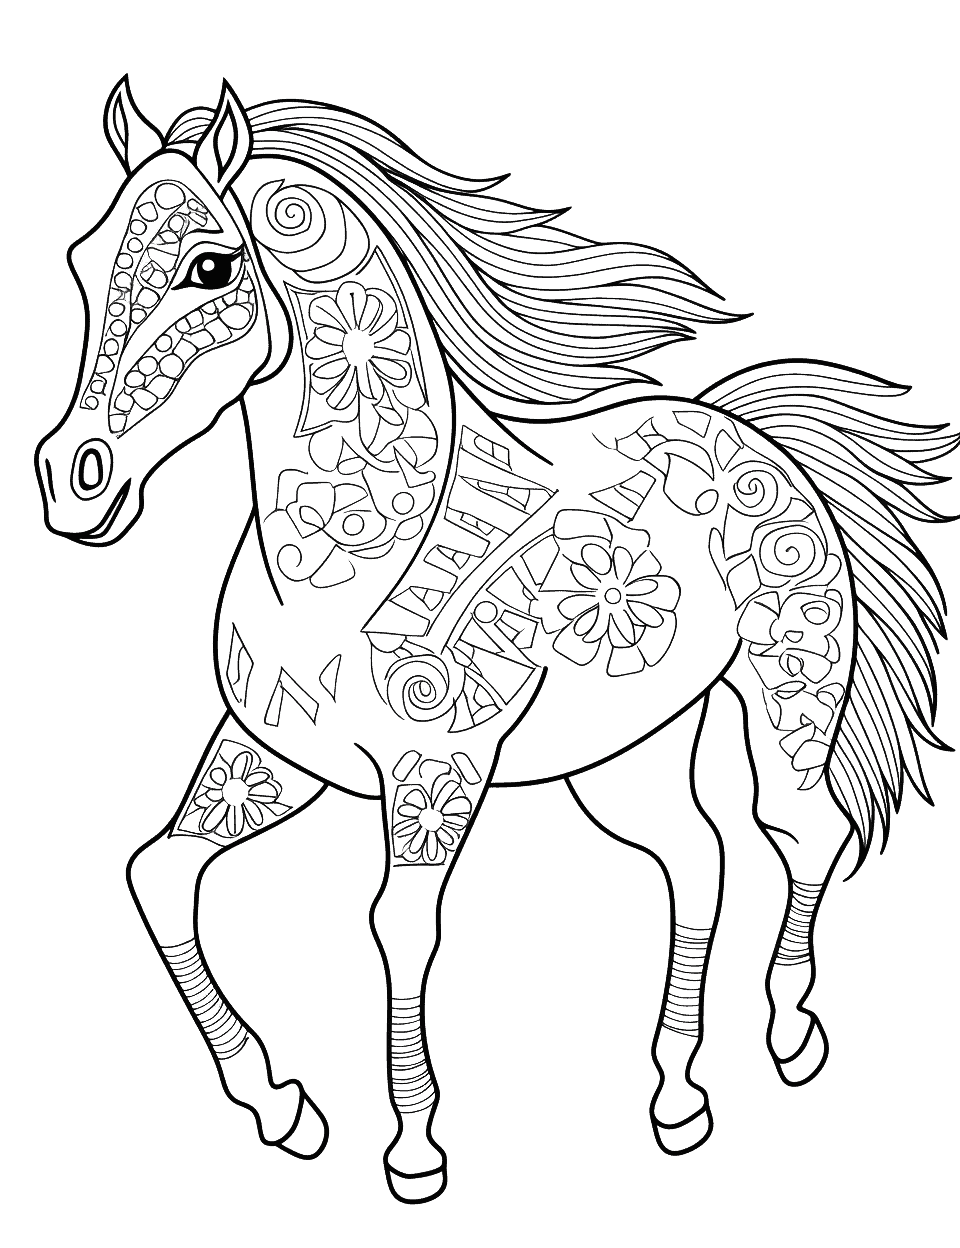 Horse Mandala Coloring Page - A beautiful mandala design incorporating horse elements, offering a calming coloring experience.